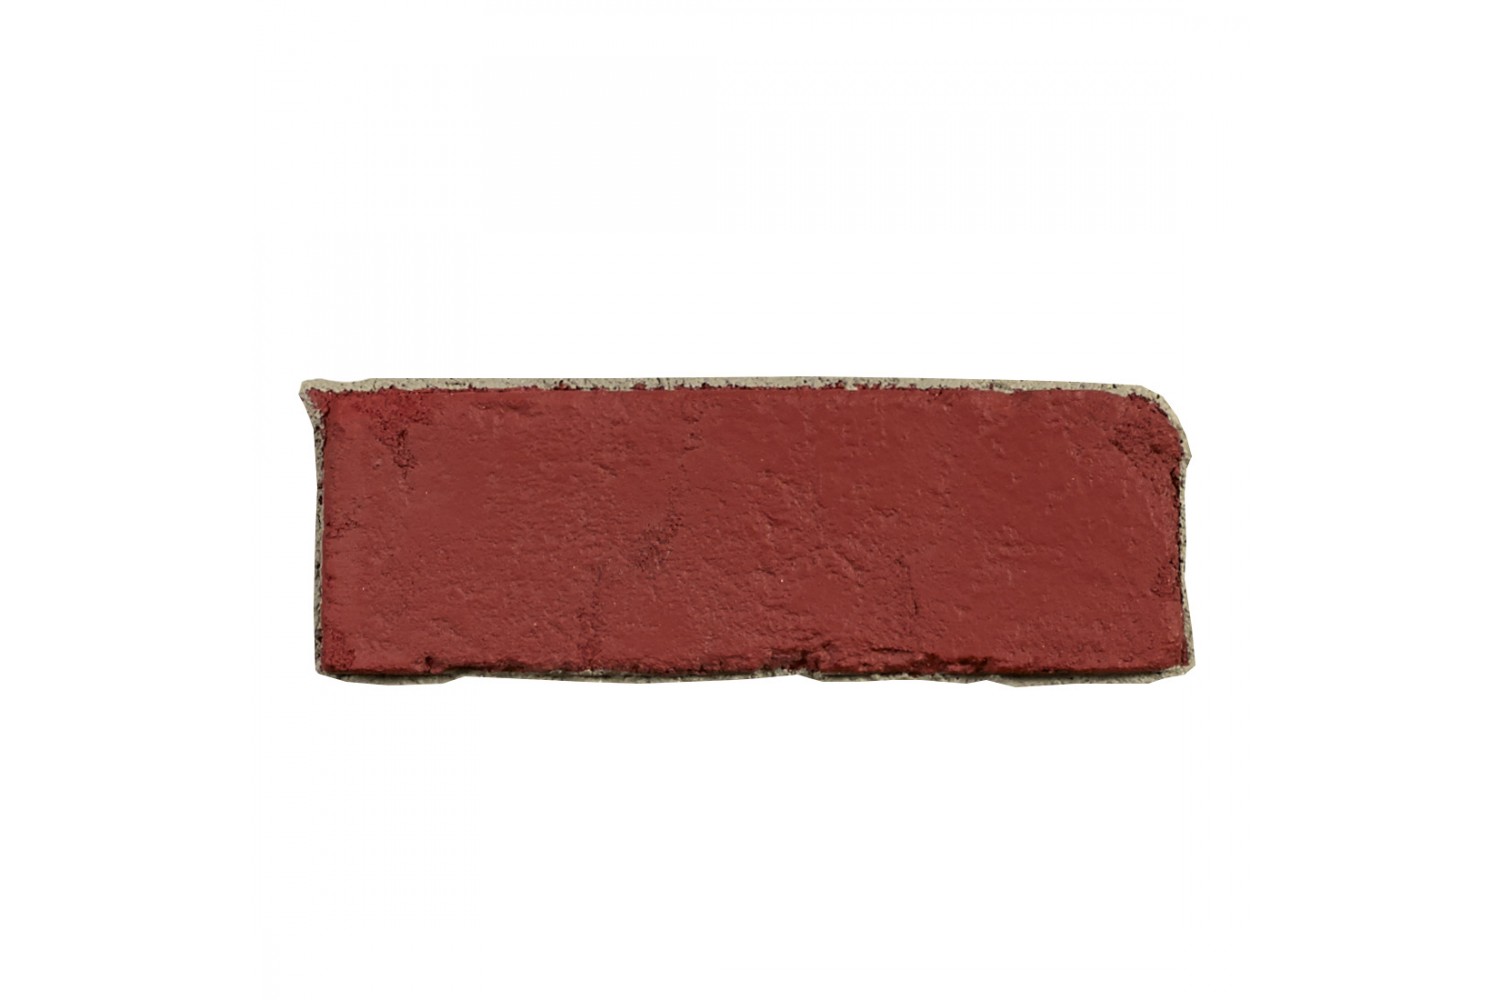 Antique Select Single Brick - Red